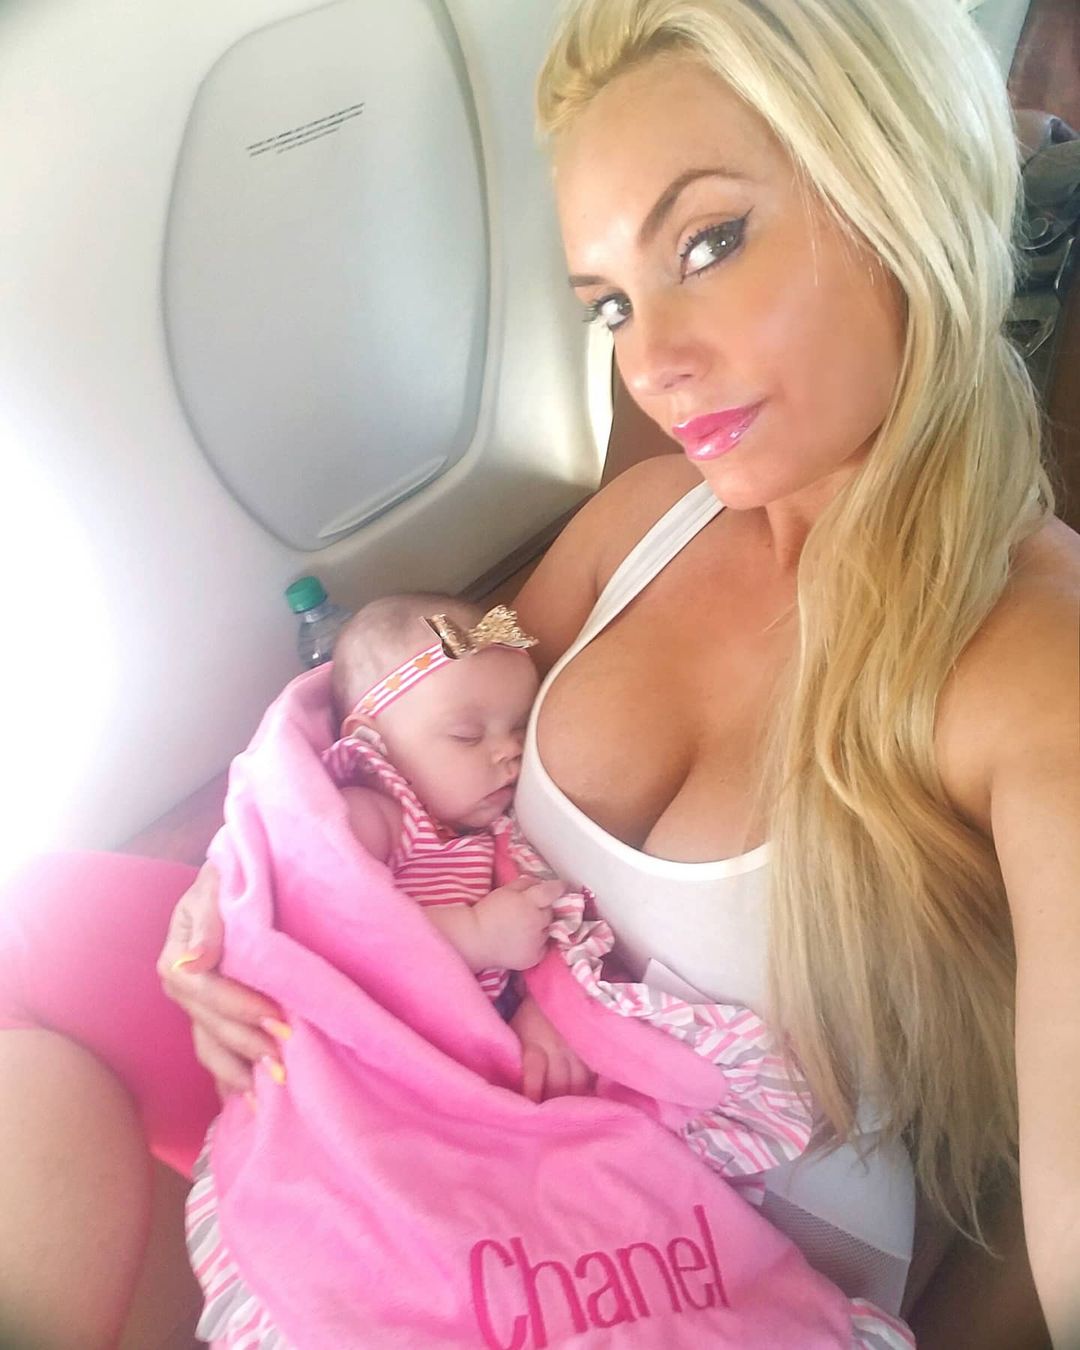 This mum's Instagram about her breastfeeding boobs is so relatable (but  rarely discussed)